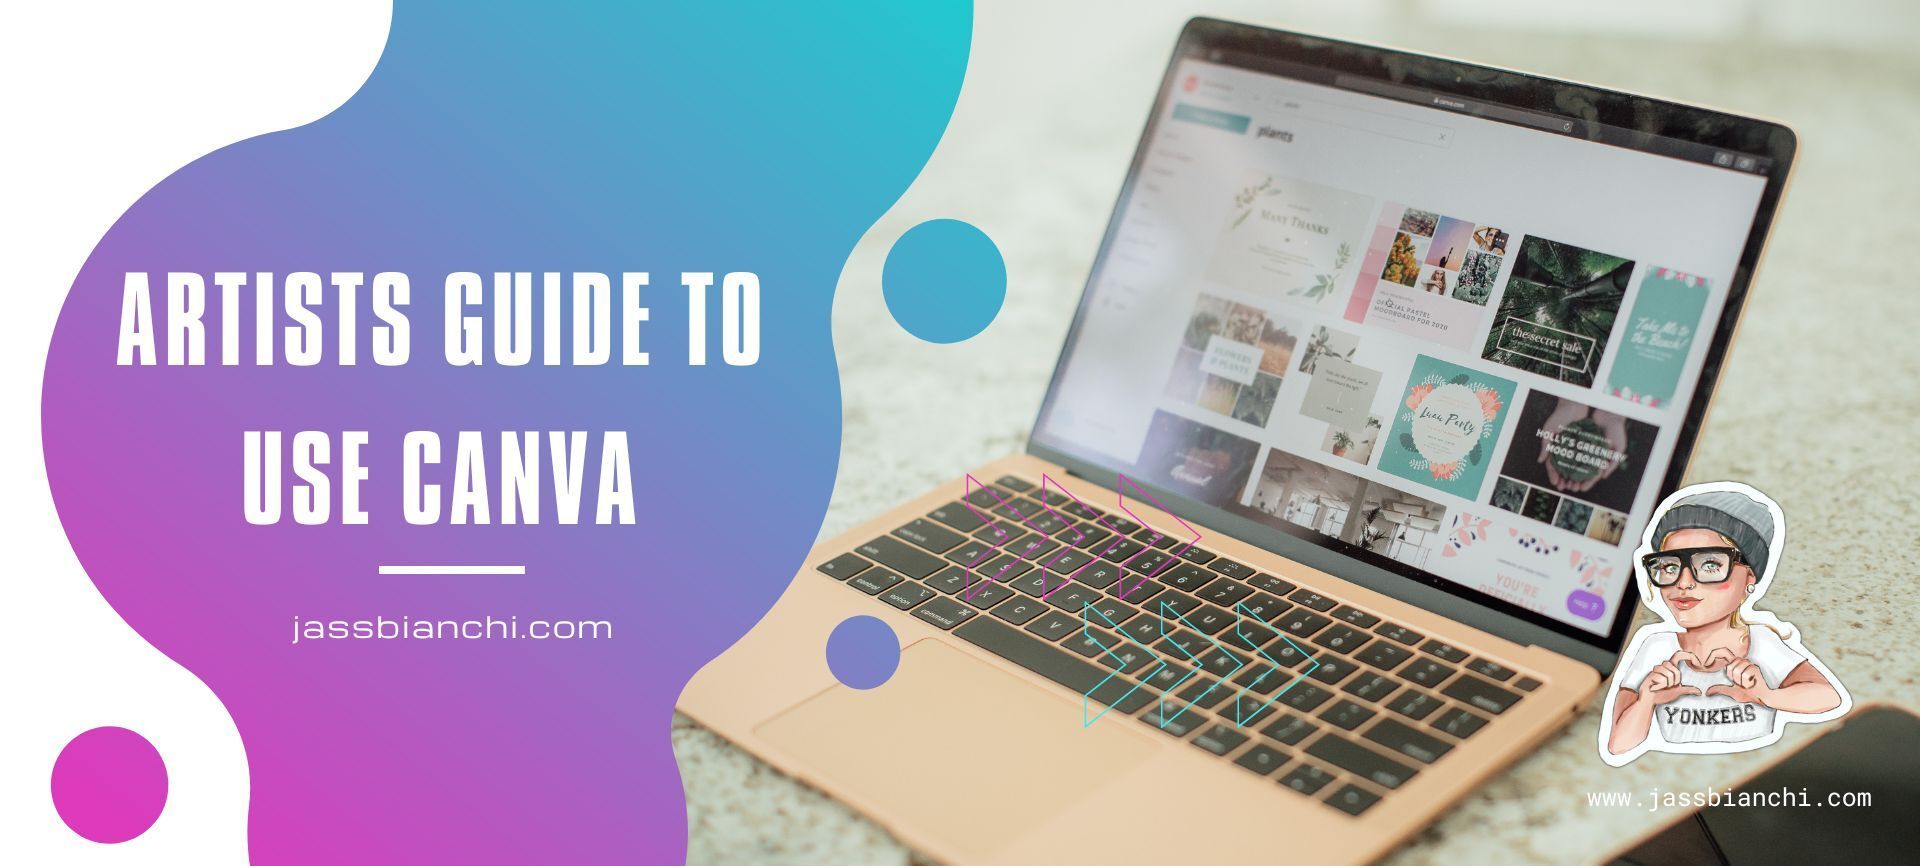 Artists Guide to Use Canva